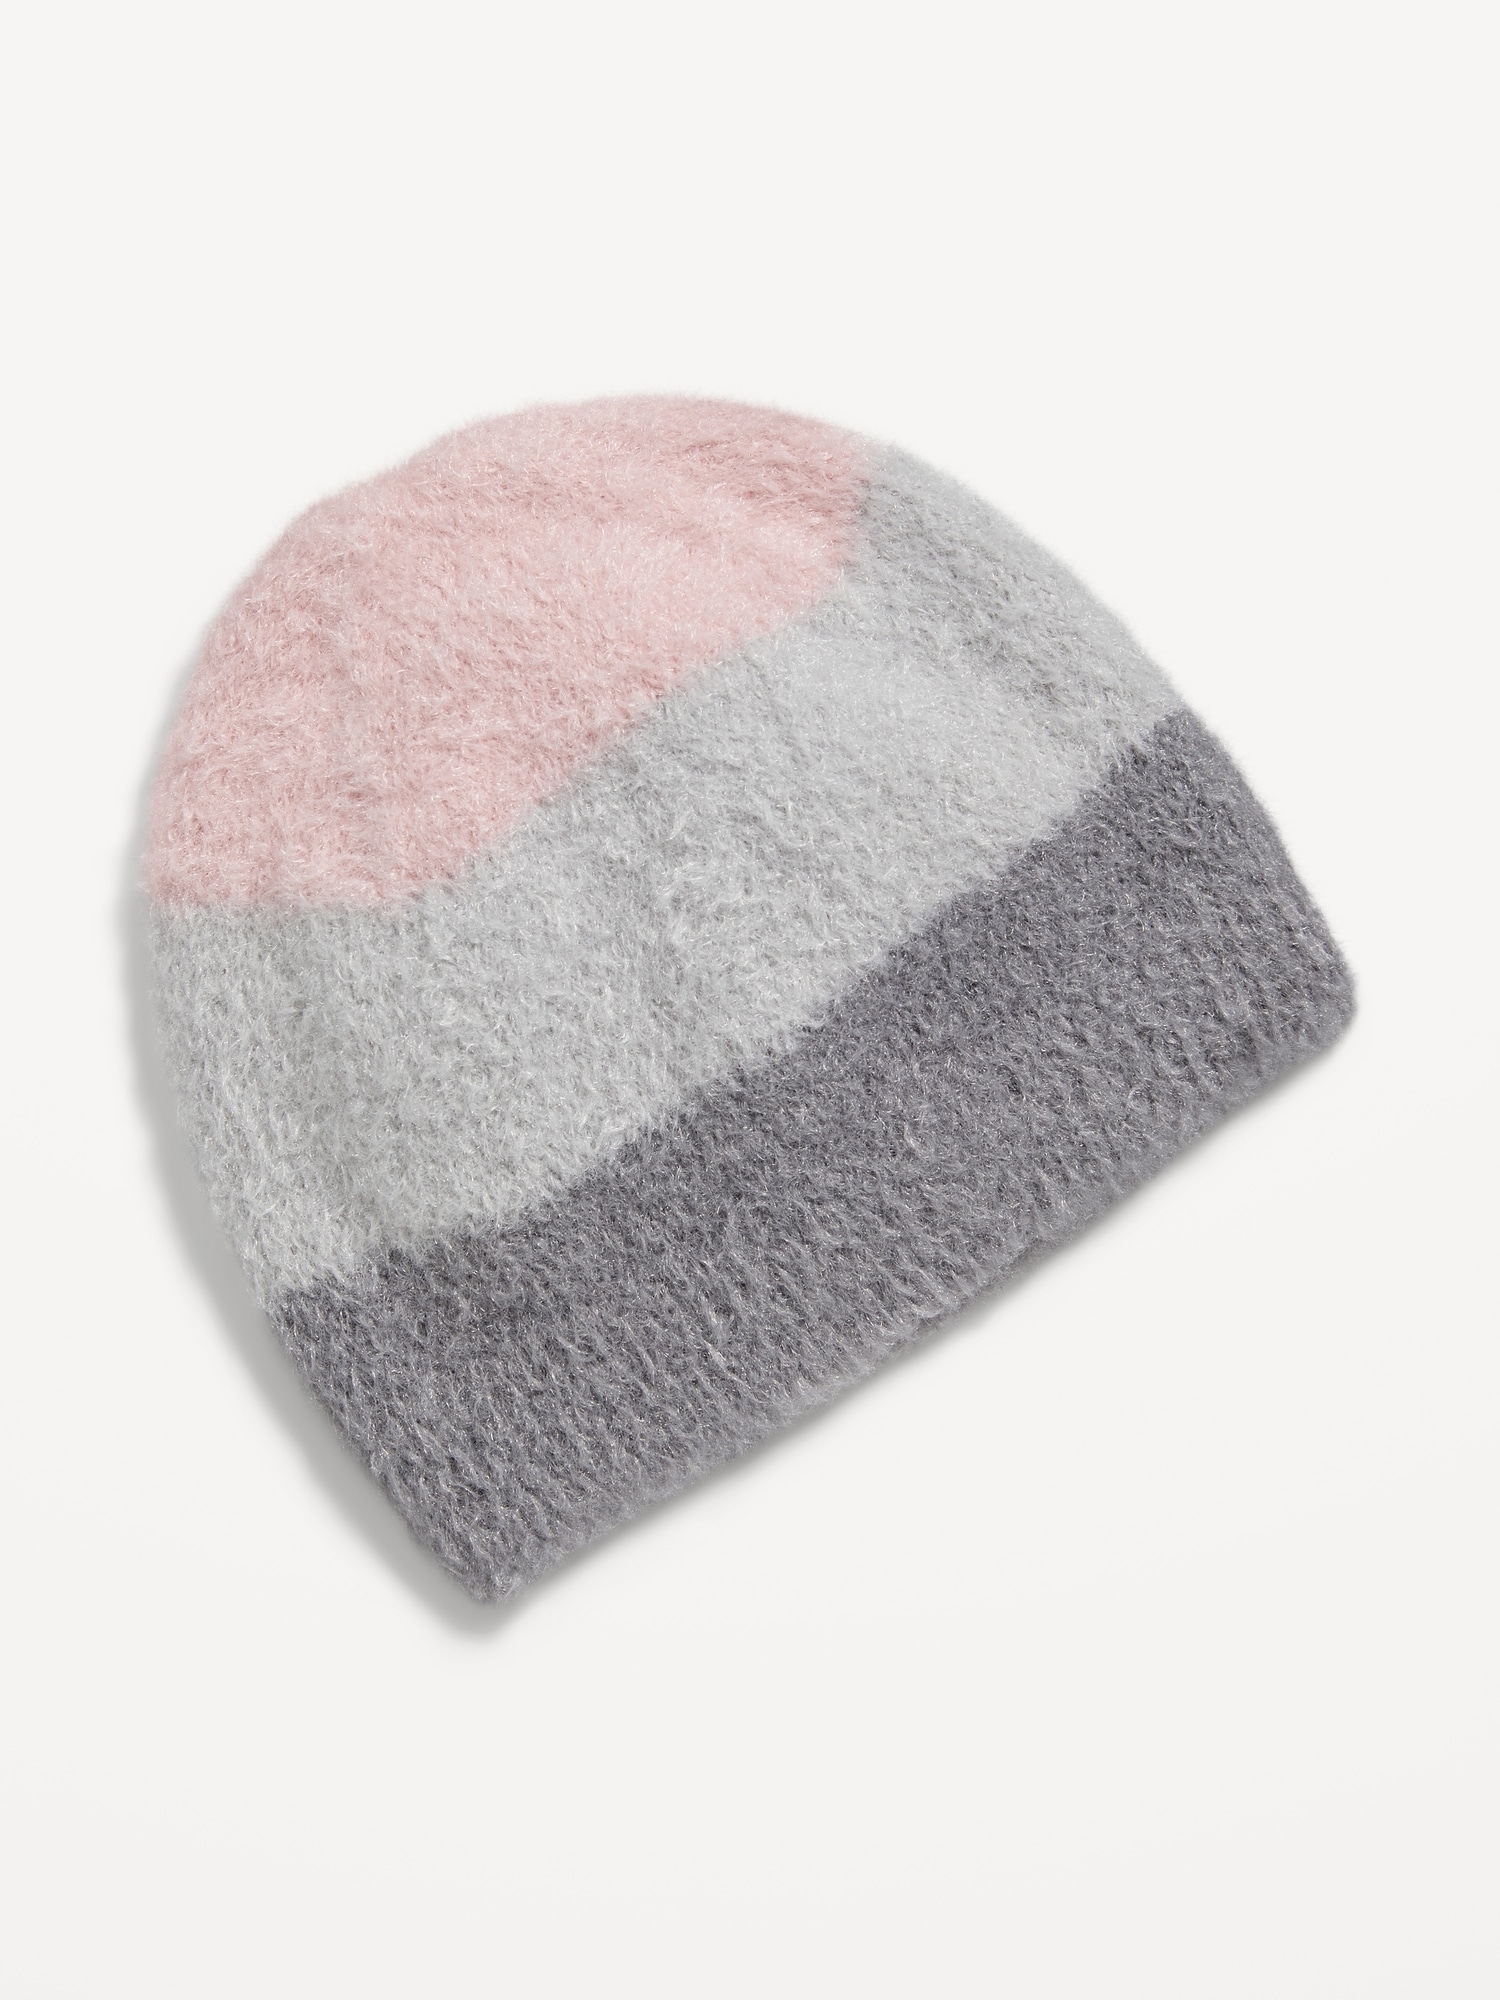 Cozy Knit Beanie for Toddler Girls